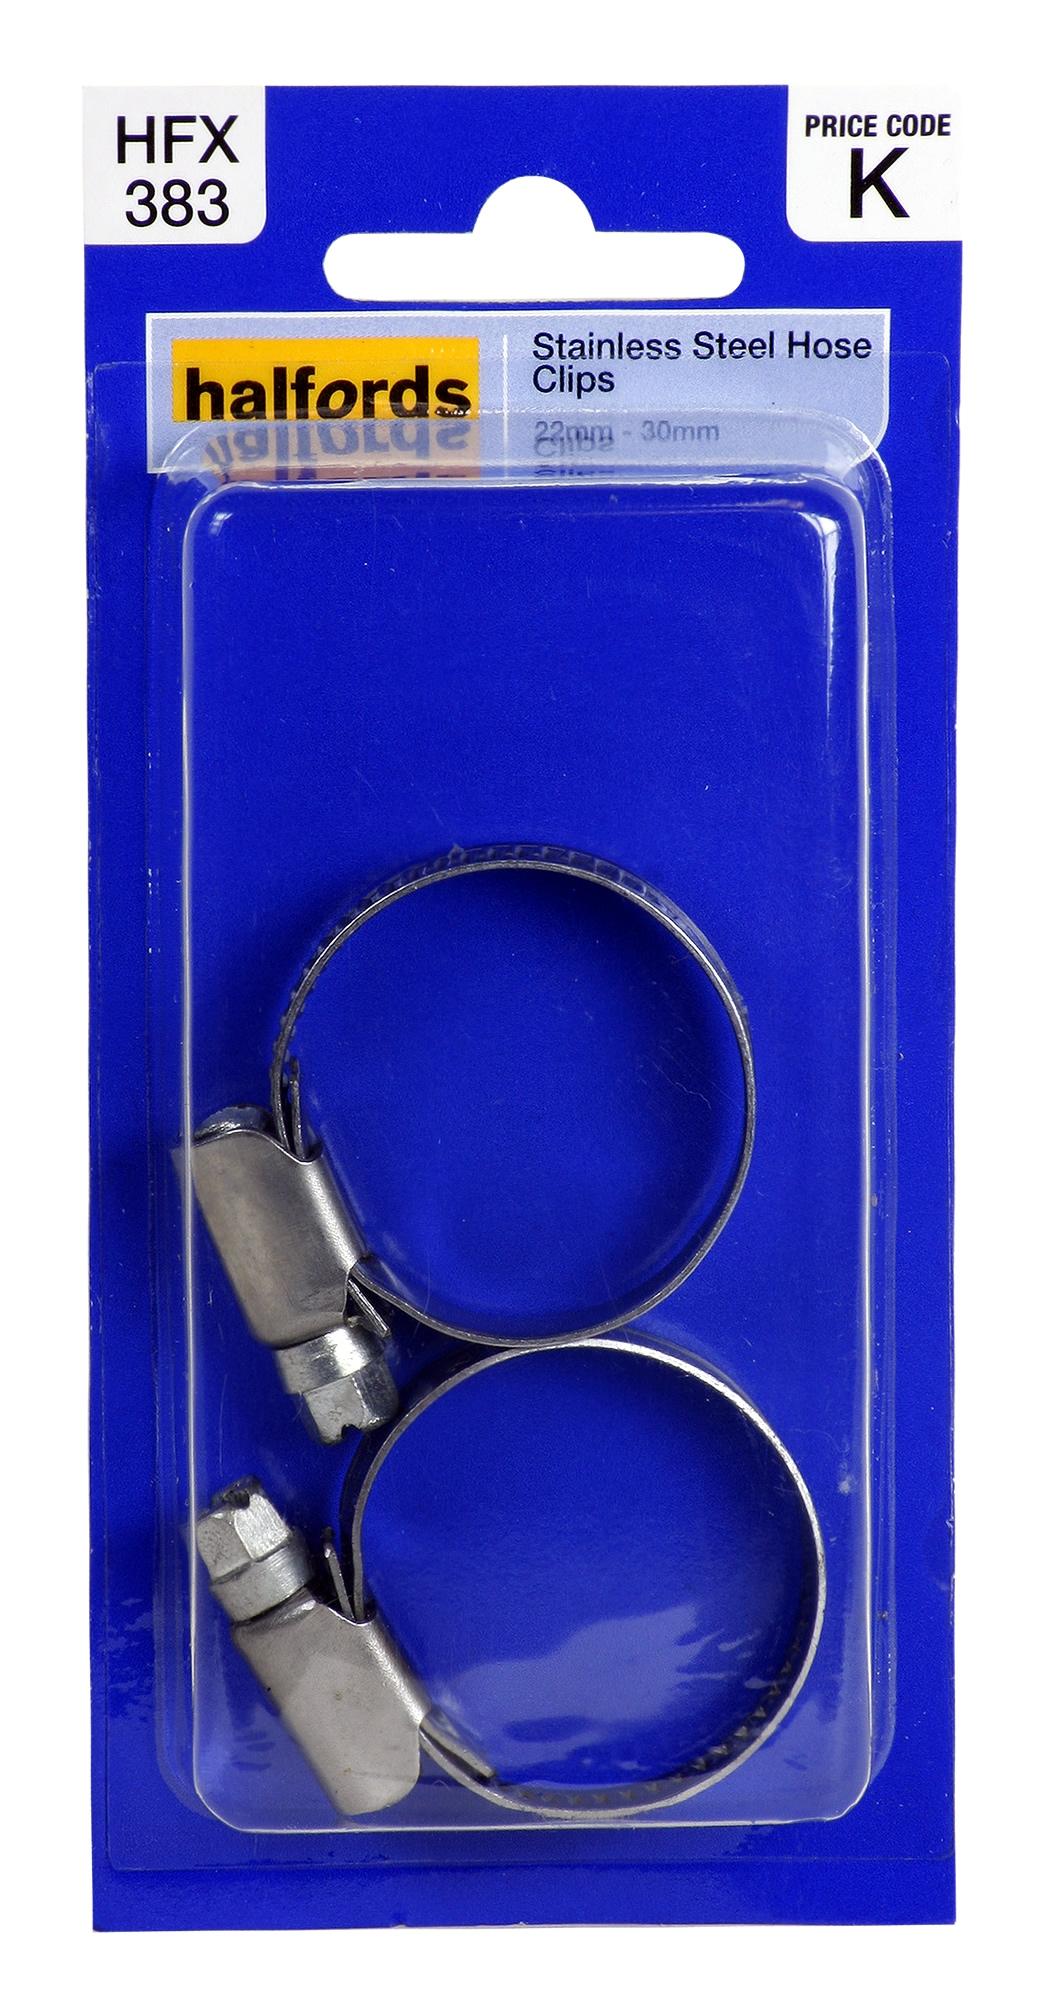 Halfords Hose Clips Stainless Steel 22-30Mm Hfx383